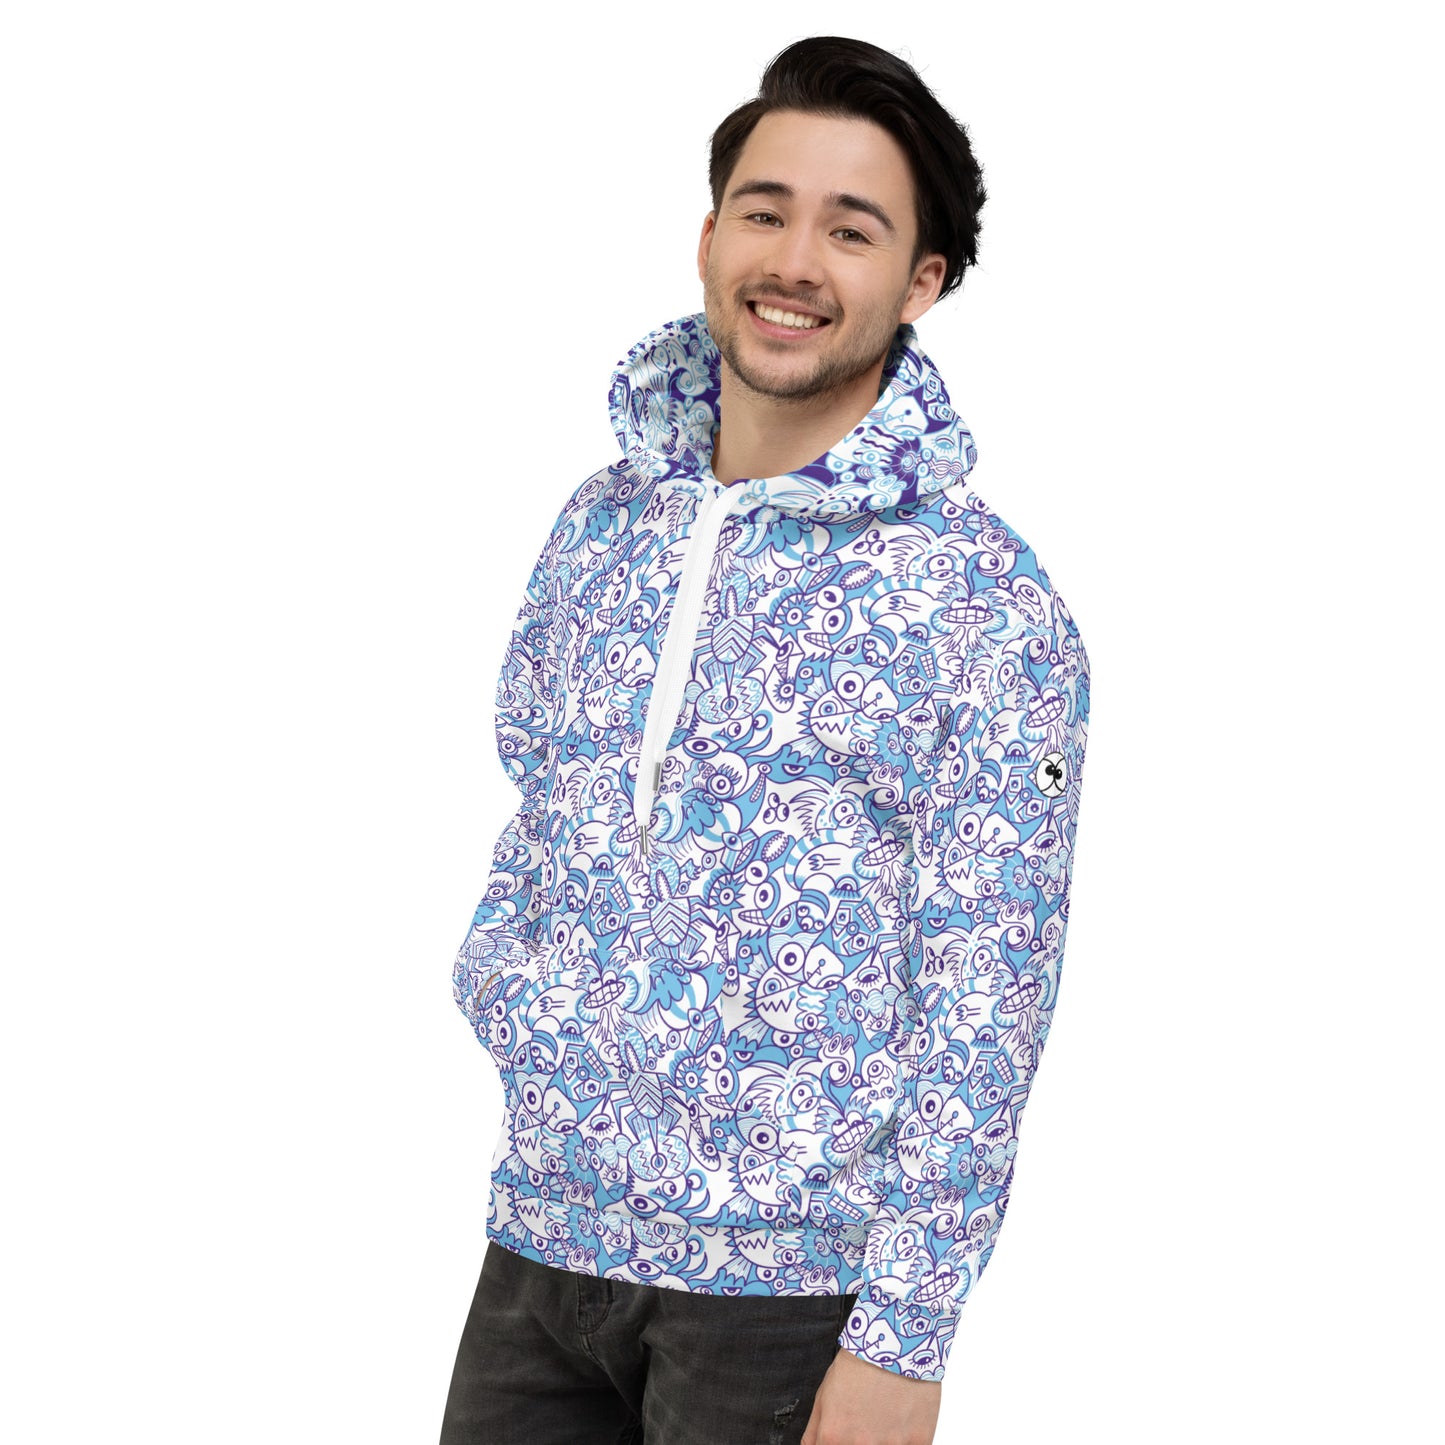 Whimsical Blue Doodle Critterscape pattern design Unisex Hoodie. Side view